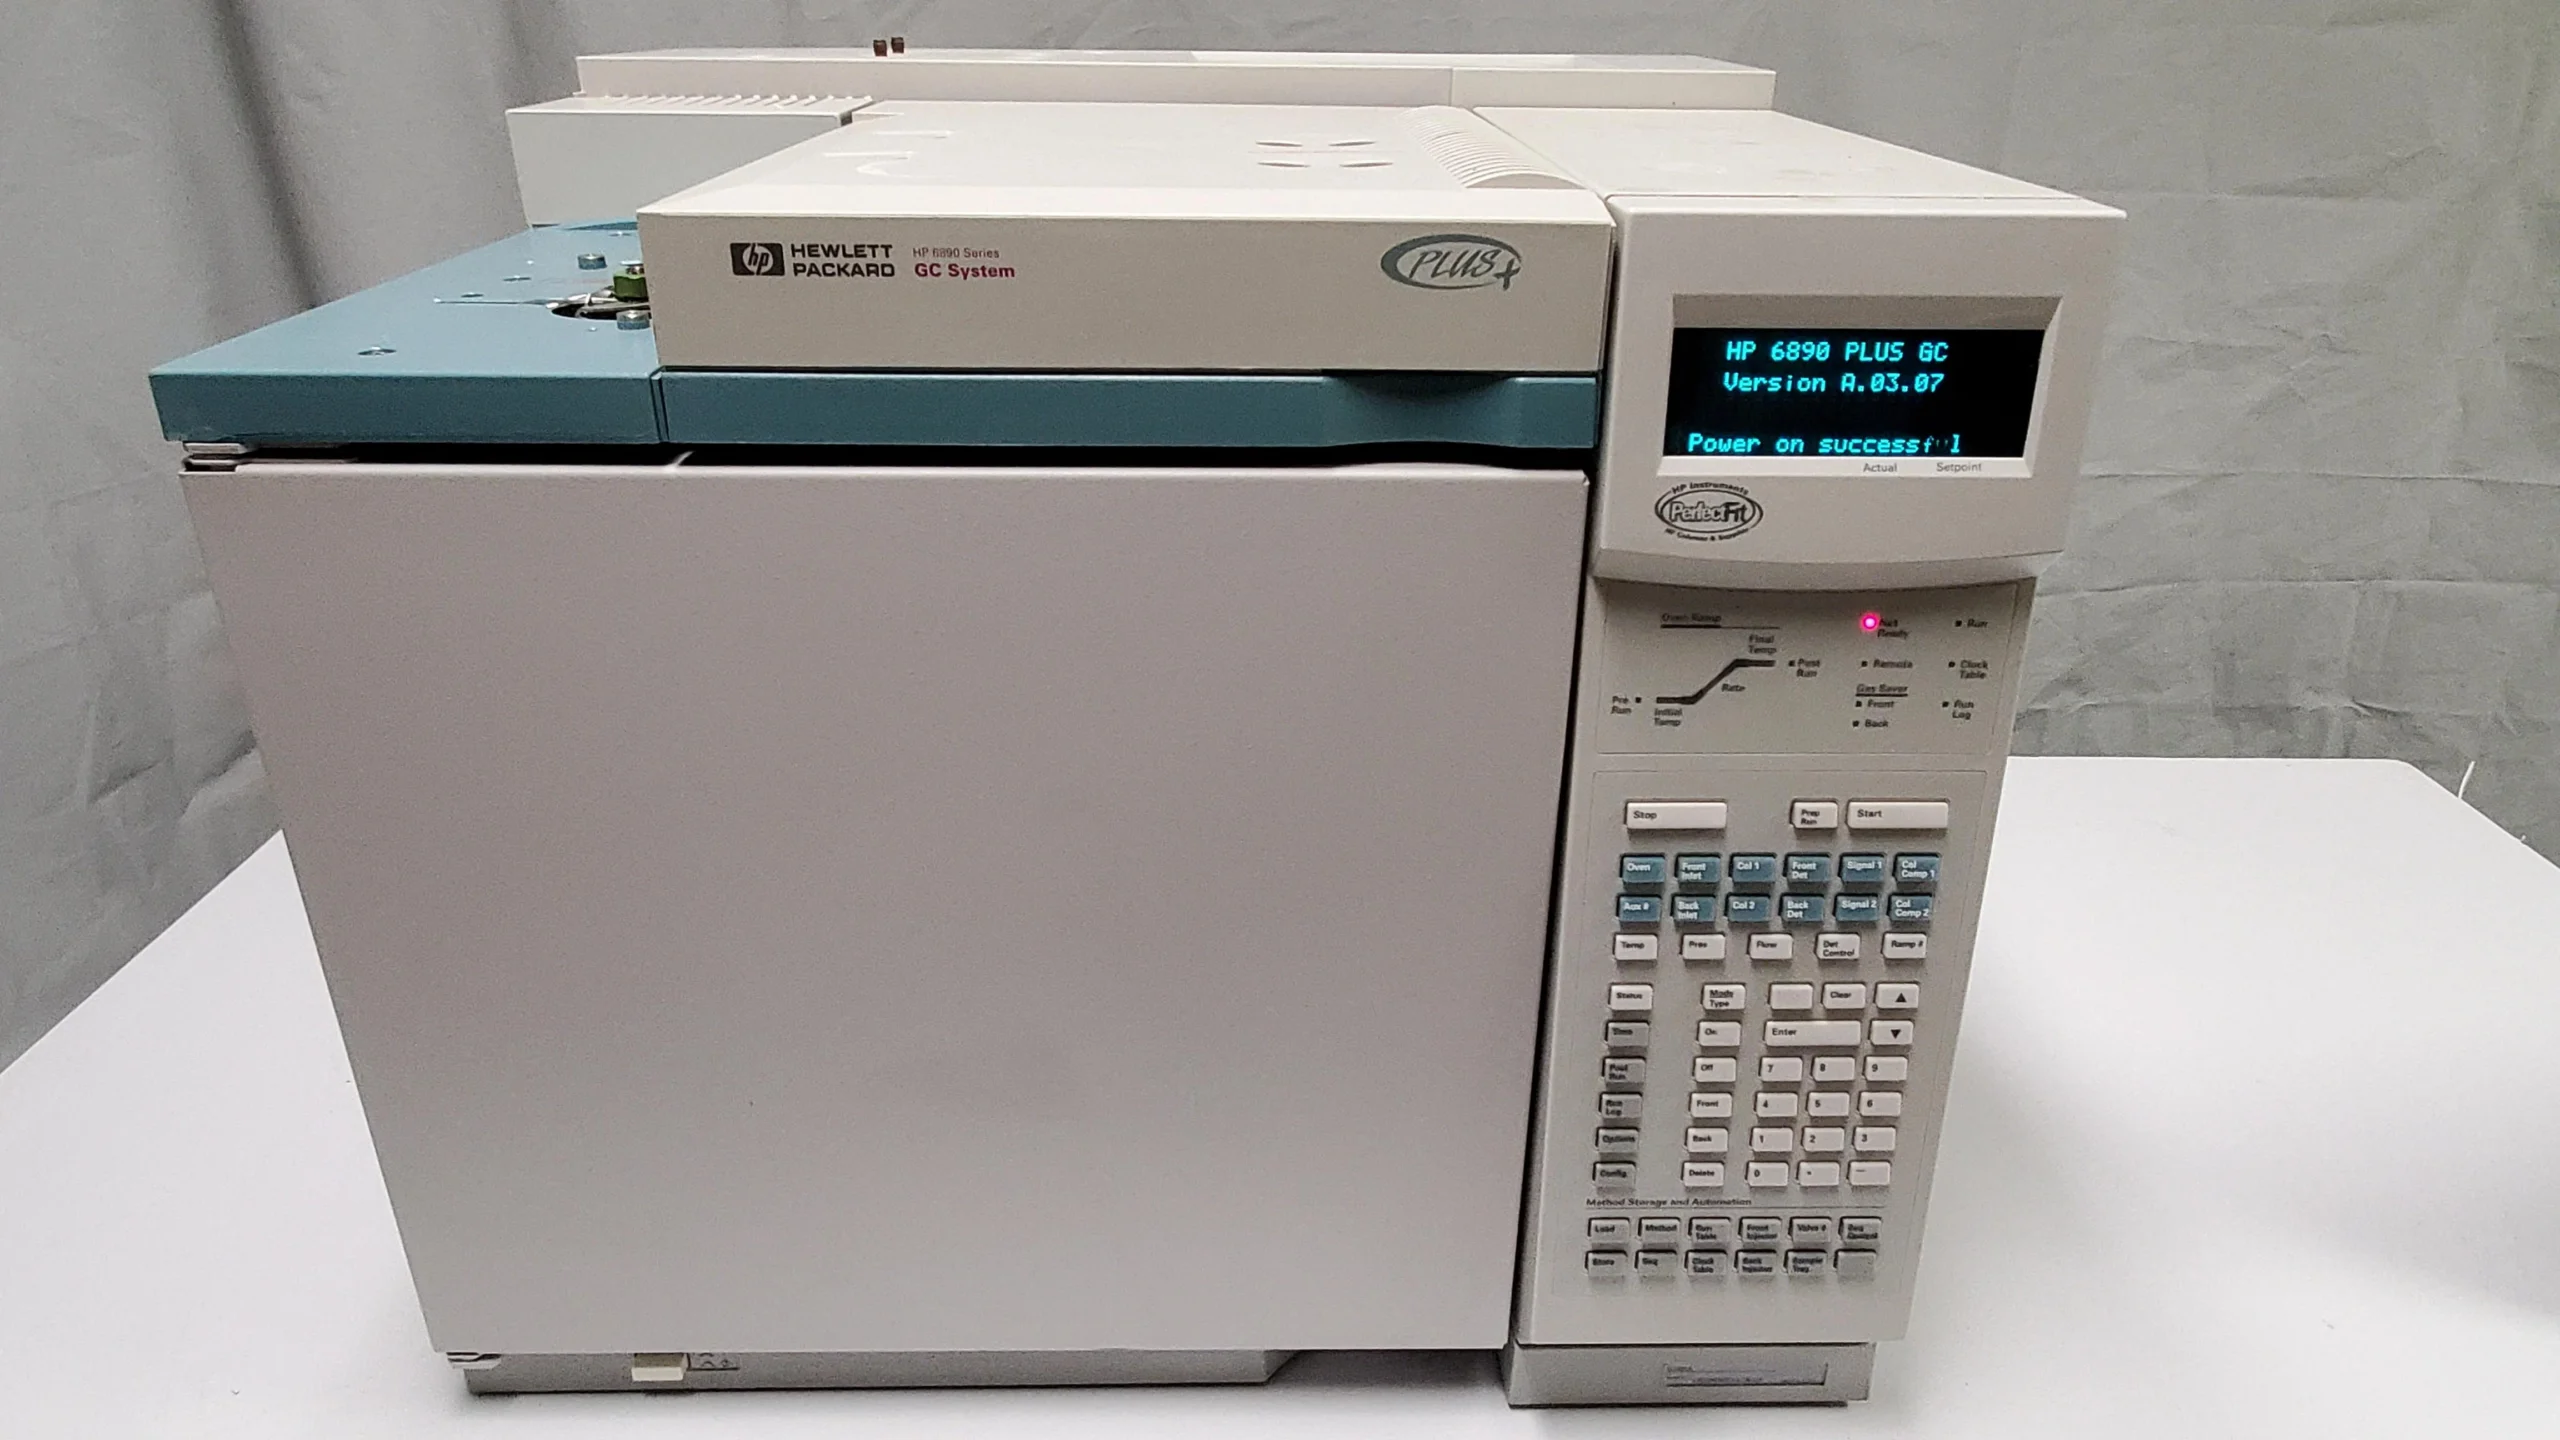 restek hewlett packard 6890 gas chromatogeaph with fid - What is FID in gas chromatography